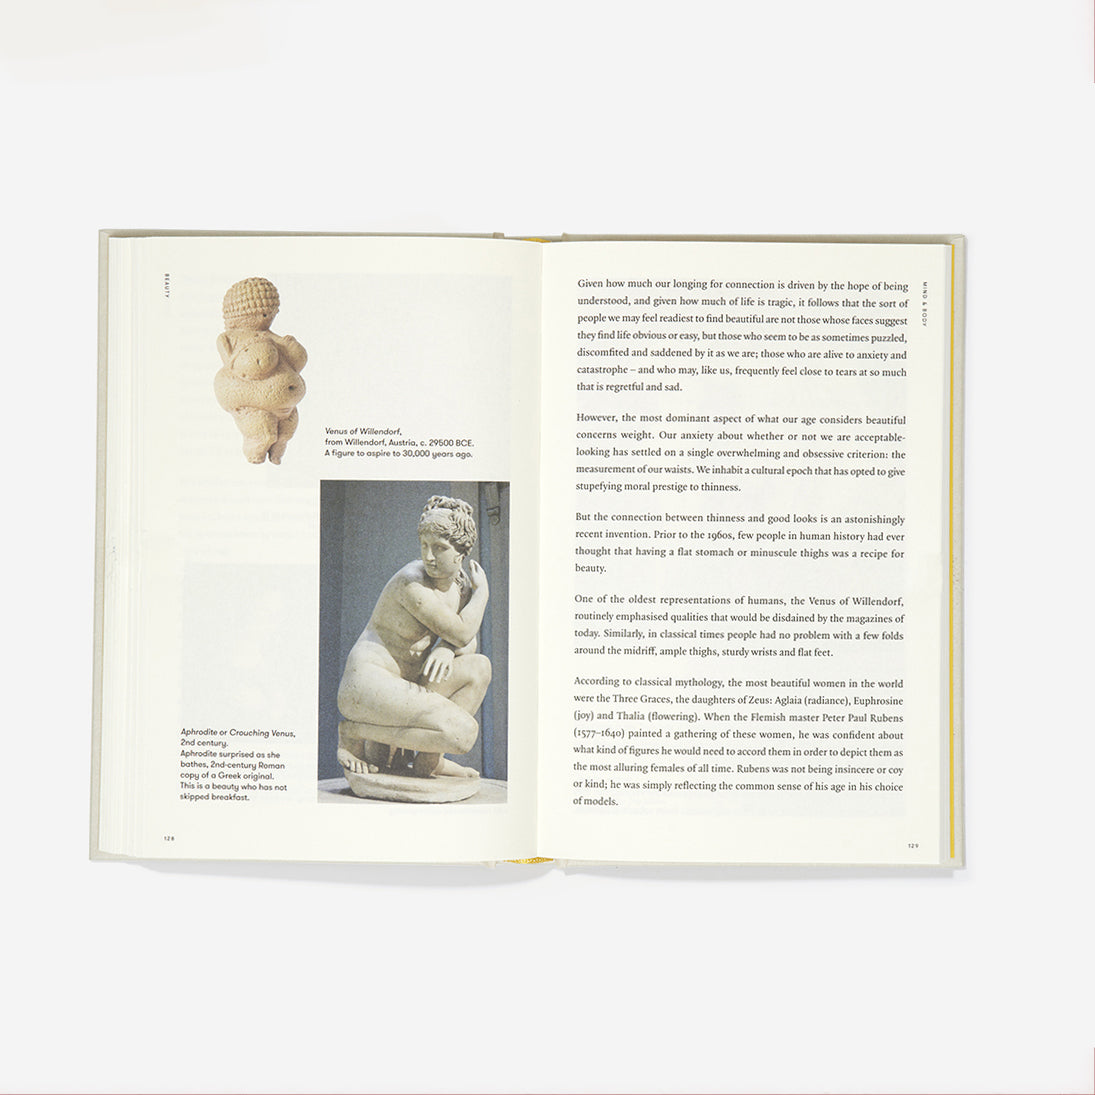 Inside pages of book featuring a number of paragraphs and a photograph of a nude sculpture